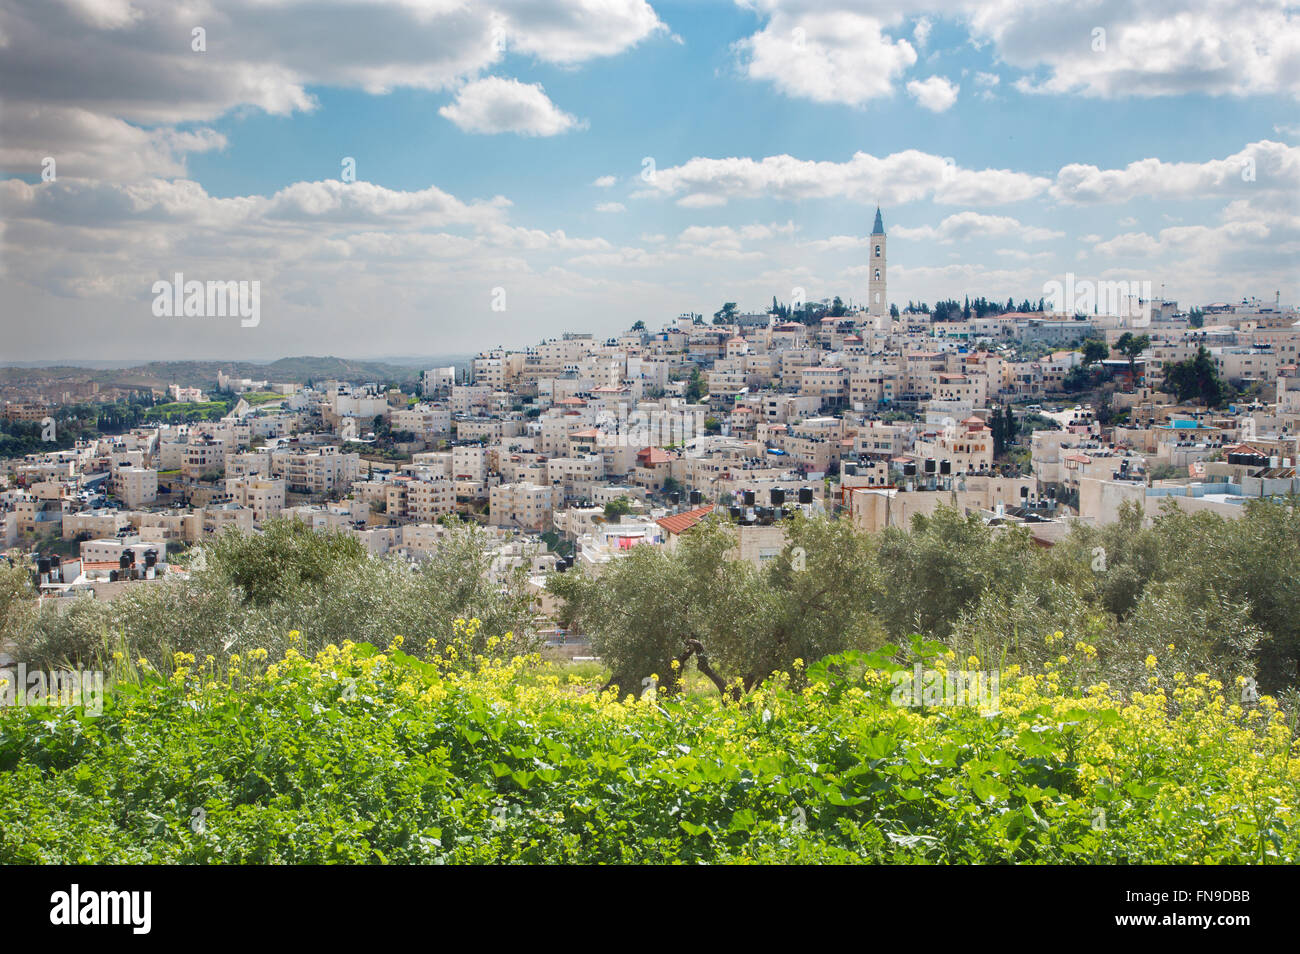 Jerusalem - The Russian orthodox church of Ascension on the Mount of Olives. Stock Photo